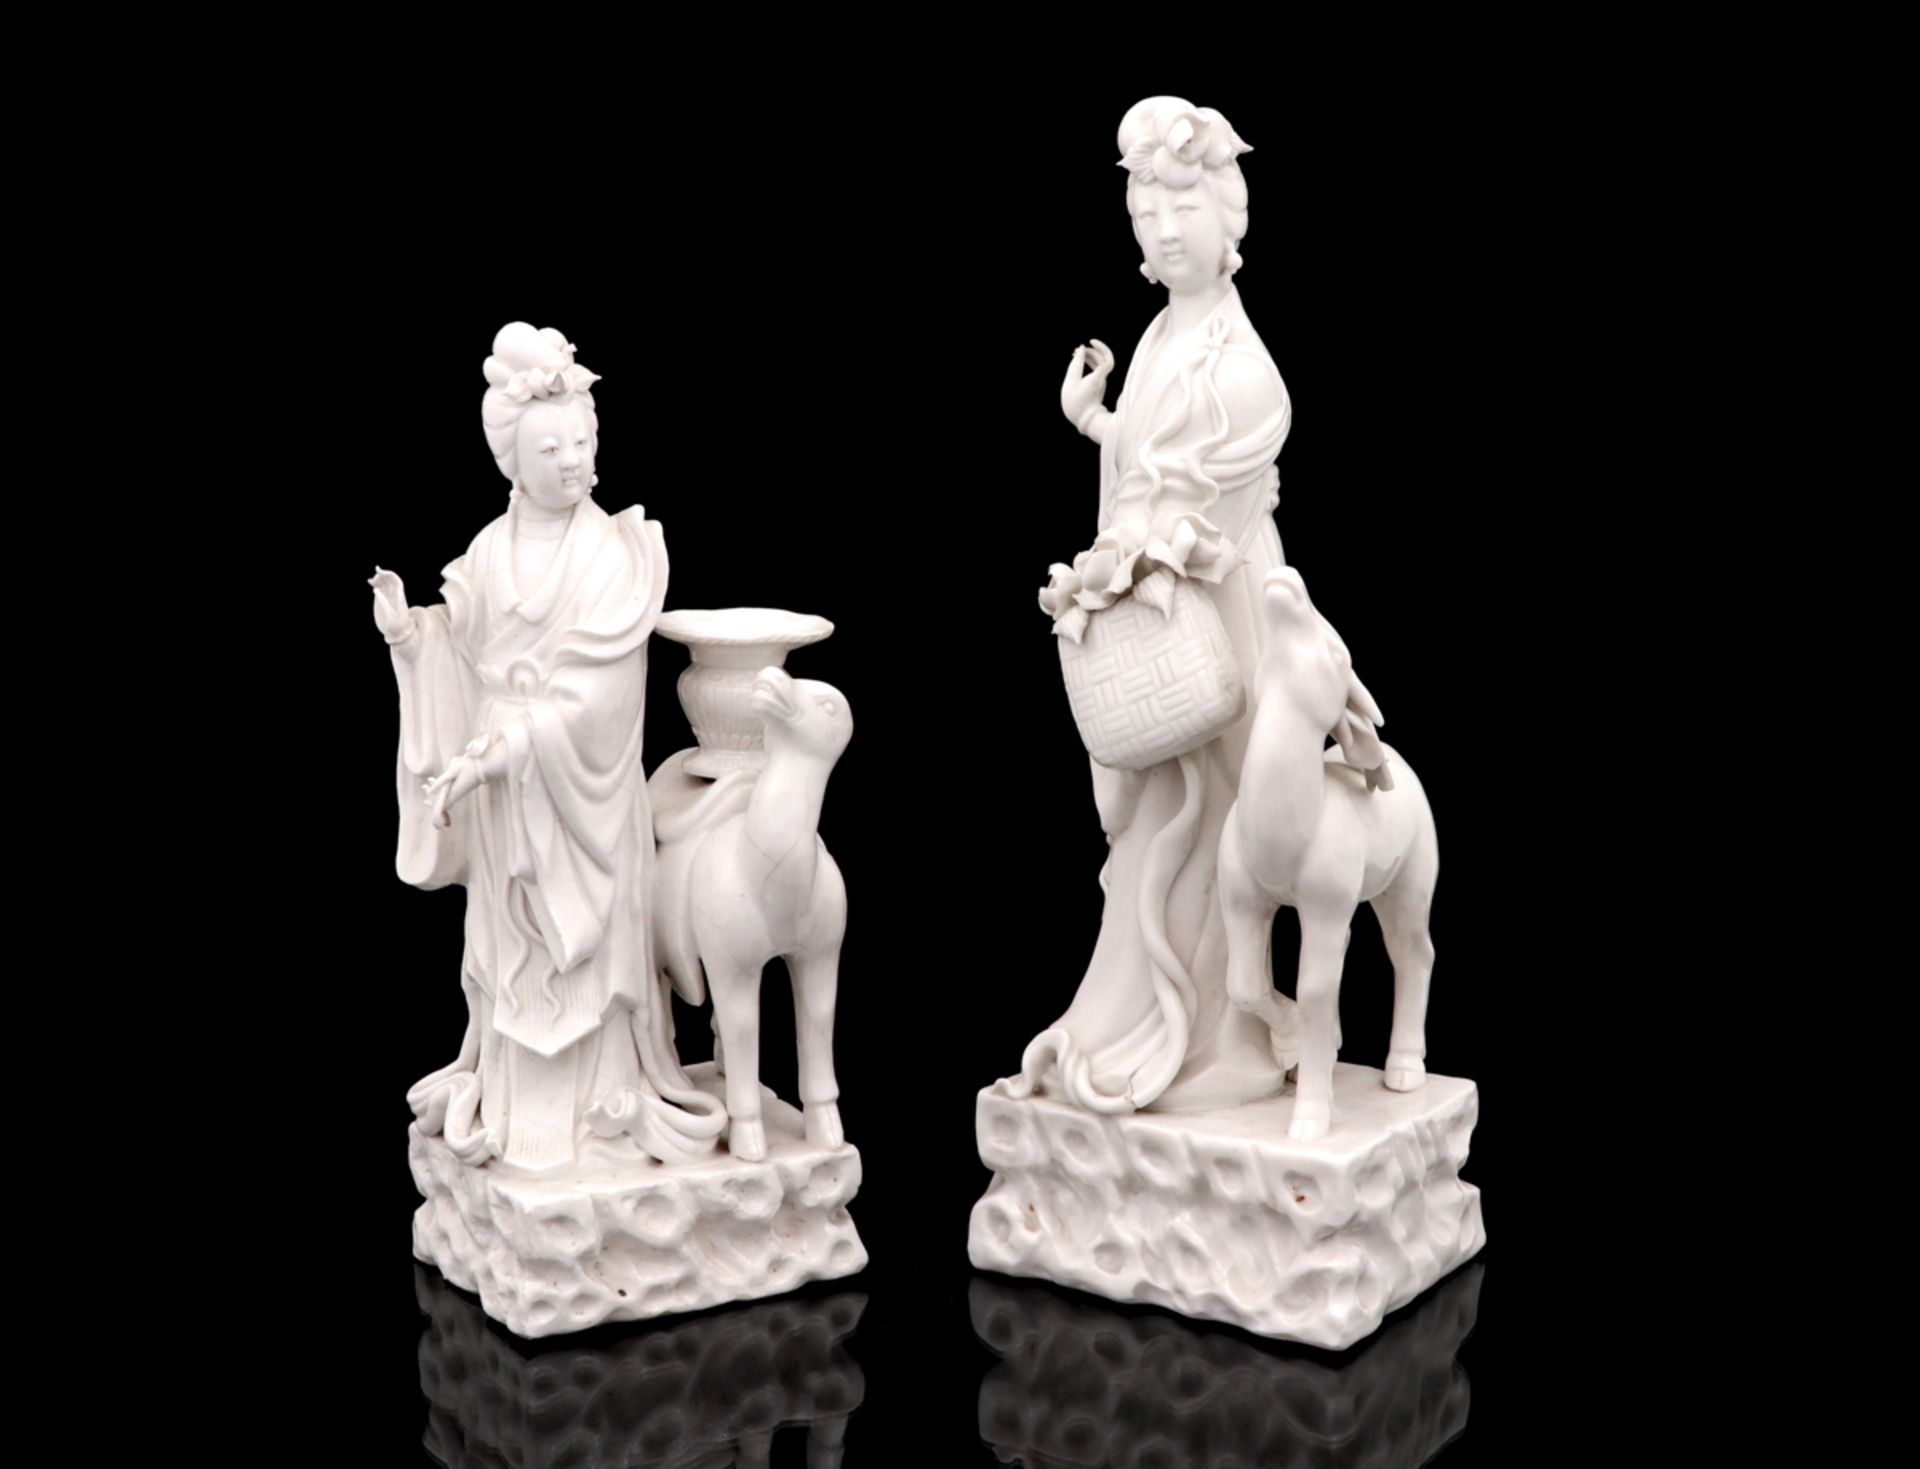 A PAIR OF CHINESE PORCELAIN GUANYINS Chinese porcelain, 20th Century, blanc-de-chine. Losses and